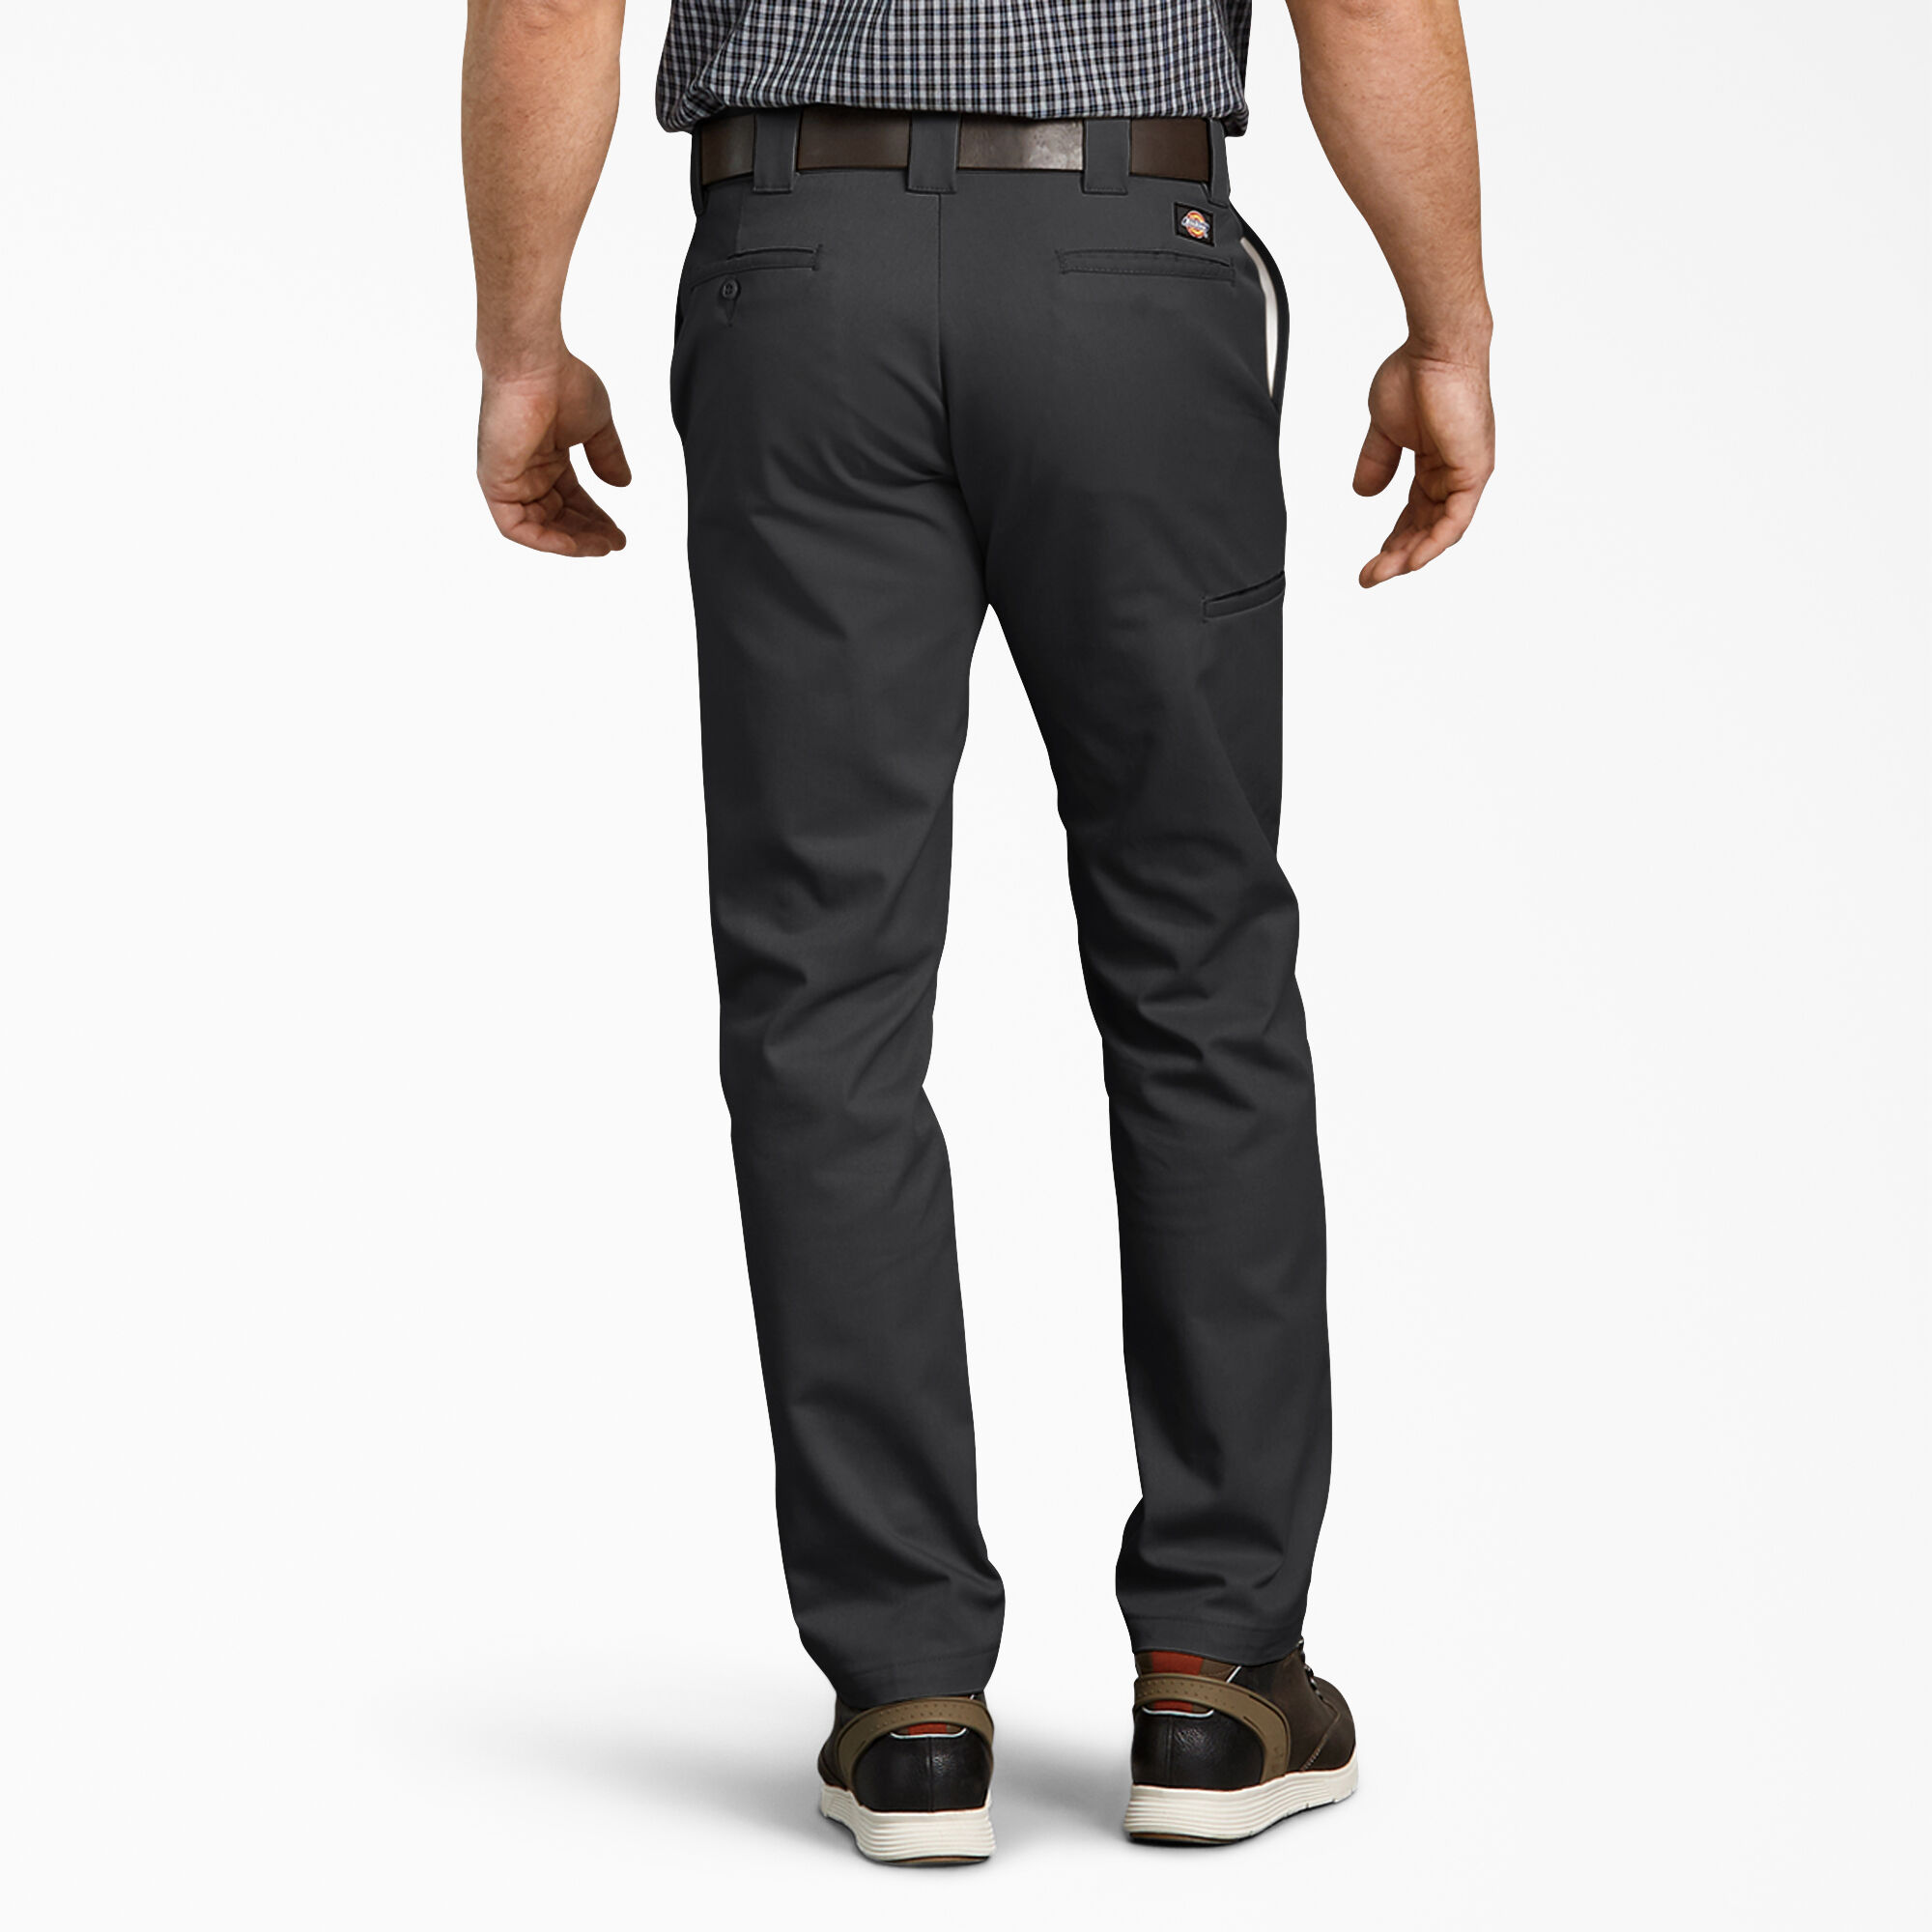 tapered slim fit pants